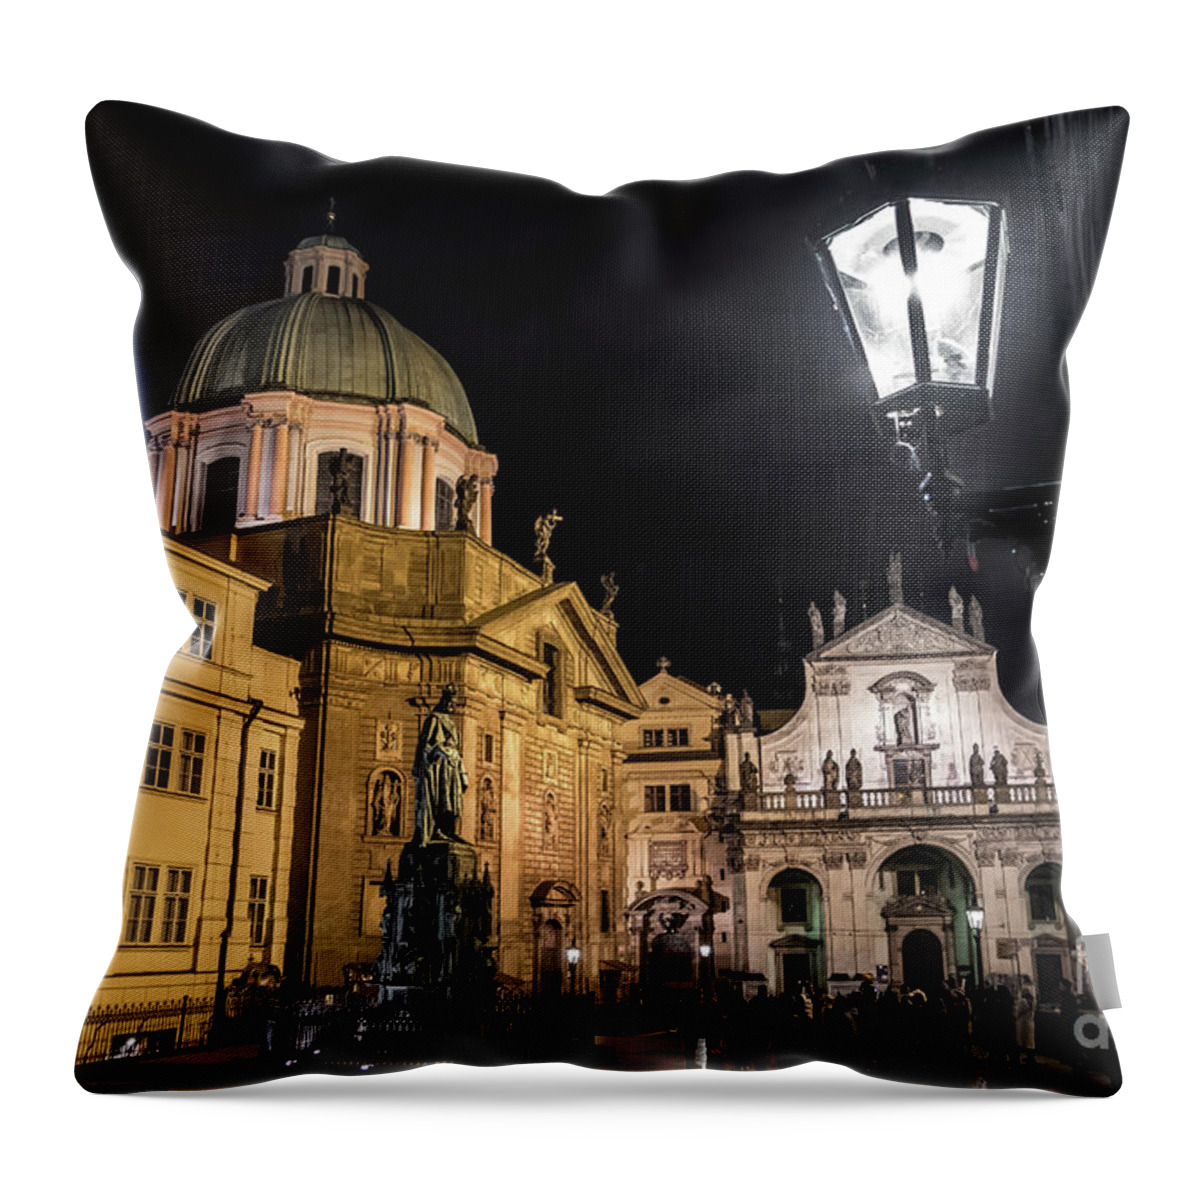 Ancient Throw Pillow featuring the photograph Historic Buildings Beneath The Tower Of Charles Bridge In The Night In Prague In The Czech Republic by Andreas Berthold